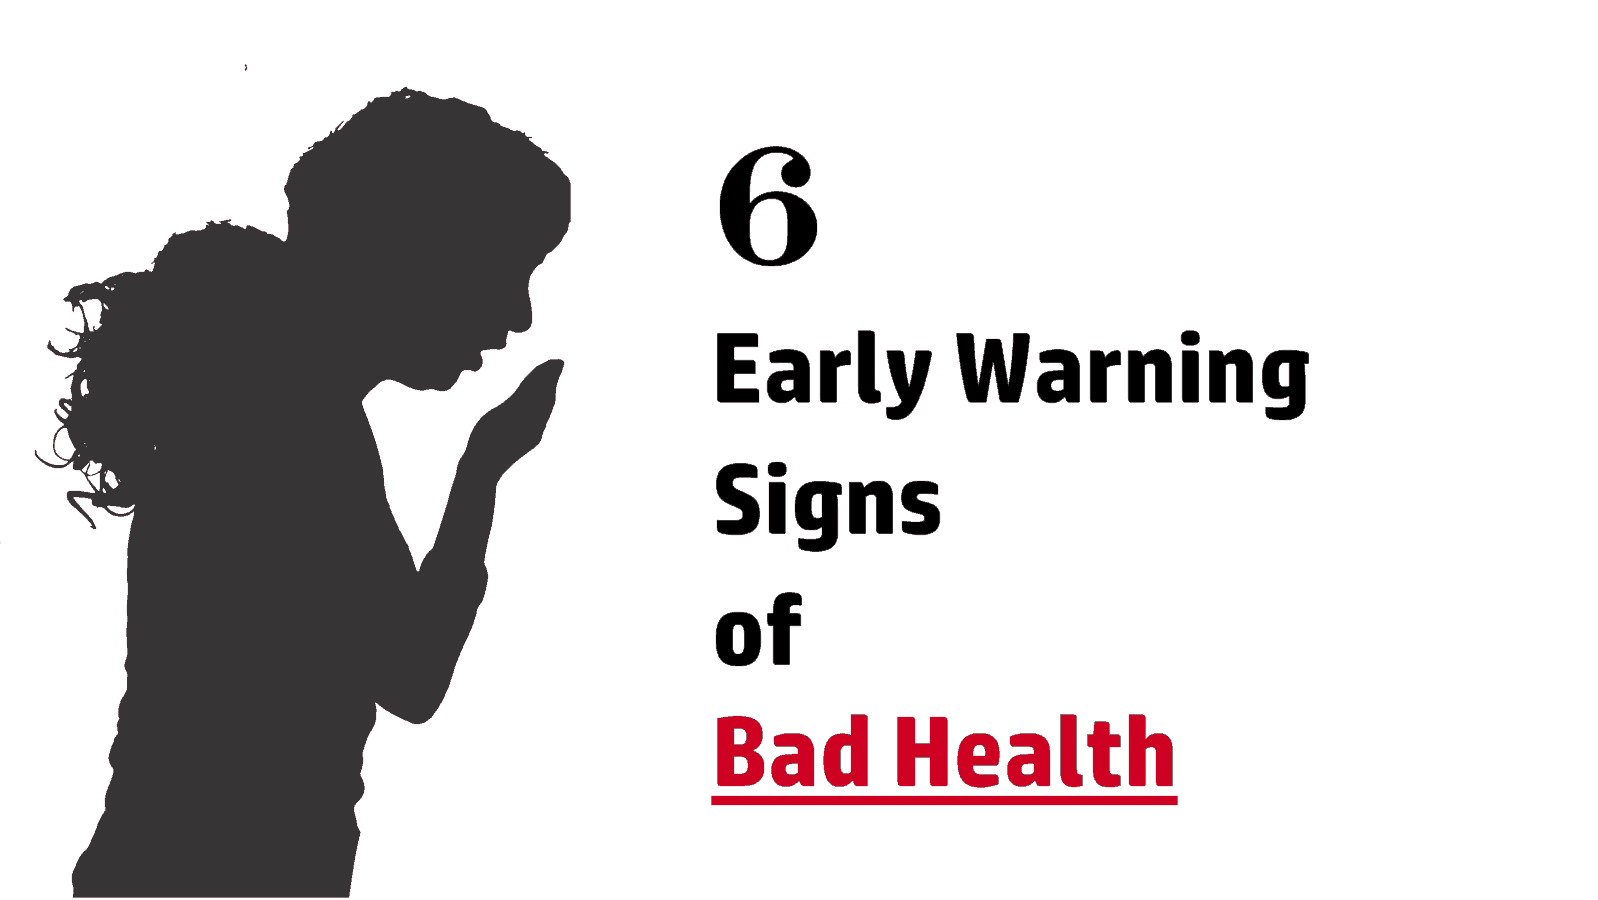 6 Early Warning Signs of Bad Health